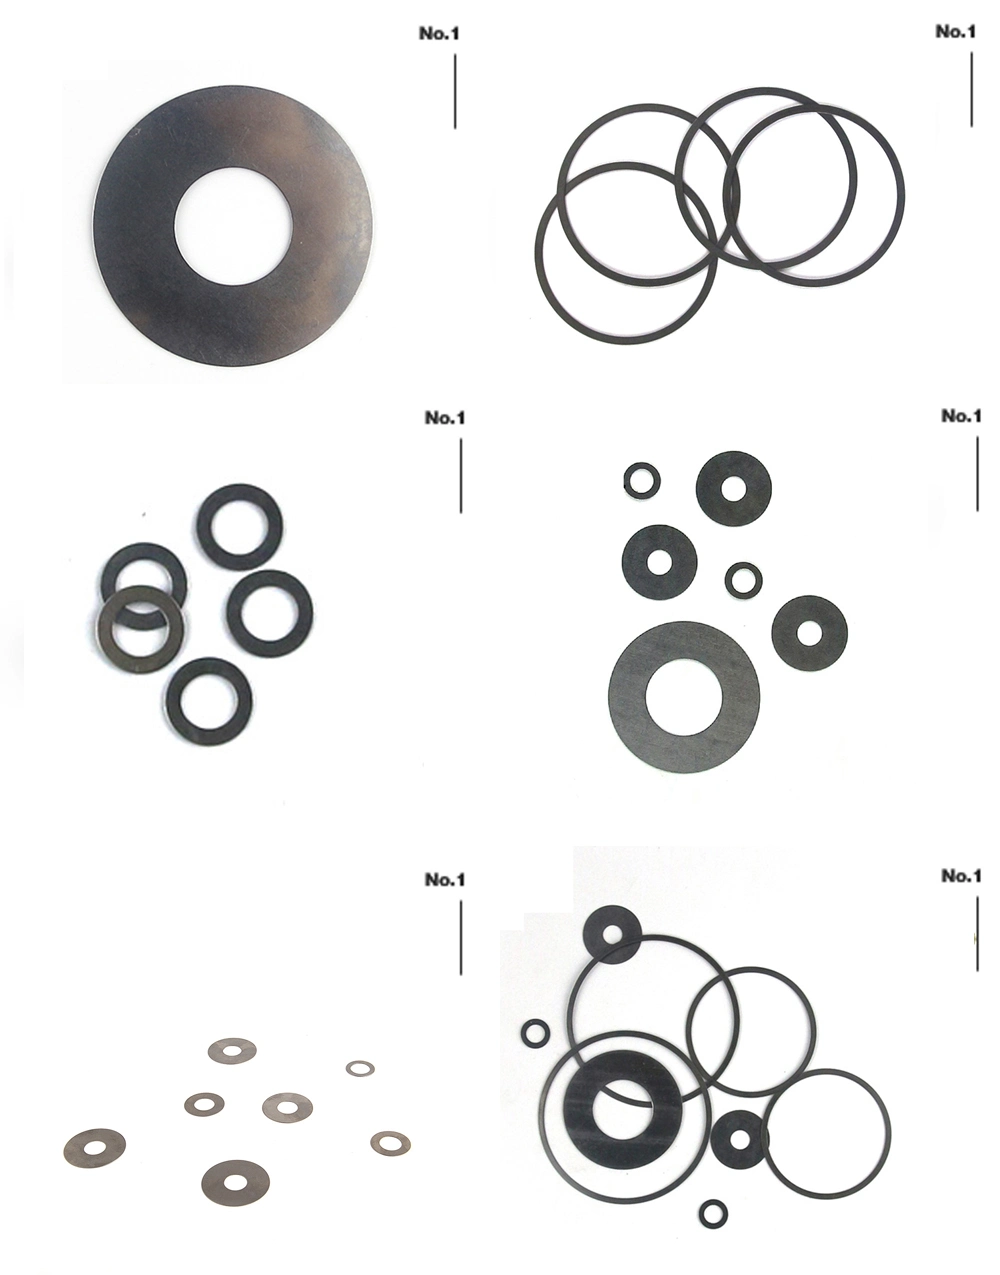 China Manufacturer Provide Stainless Steel Flat Washers with Good Quality